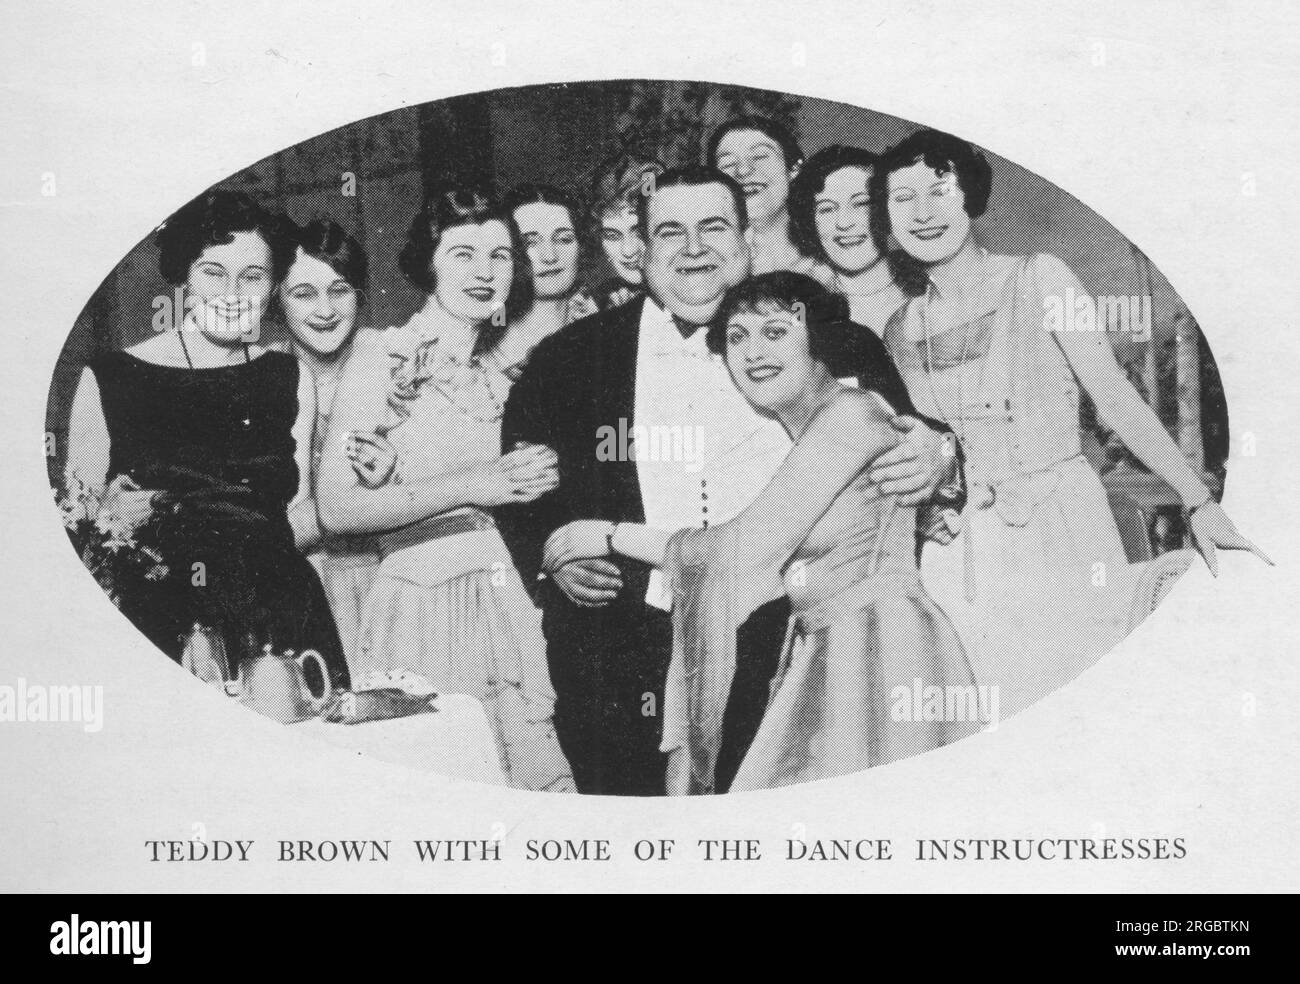 Teddy Brown, popular band leader during the inter-war years, and a regular at Kate Meyrick's 43 Club, pictured with the club's dance hostesses or instructresses. Kate Evelyn 'Ma' Meyrick (1875 -1933), an Irish business woman and 'Queen' of the London nightclub scene. She ran '43', a late-night jazz club at 43 Gerrard Street in Soho, was prosecuted several times for breaching licensing laws and went to prison for bribing policemen to ignore these breaches. Her book 'Secrets of the 43' was banned on its publication in 1933. Three of her daughters married peers of the realm. Stock Photo